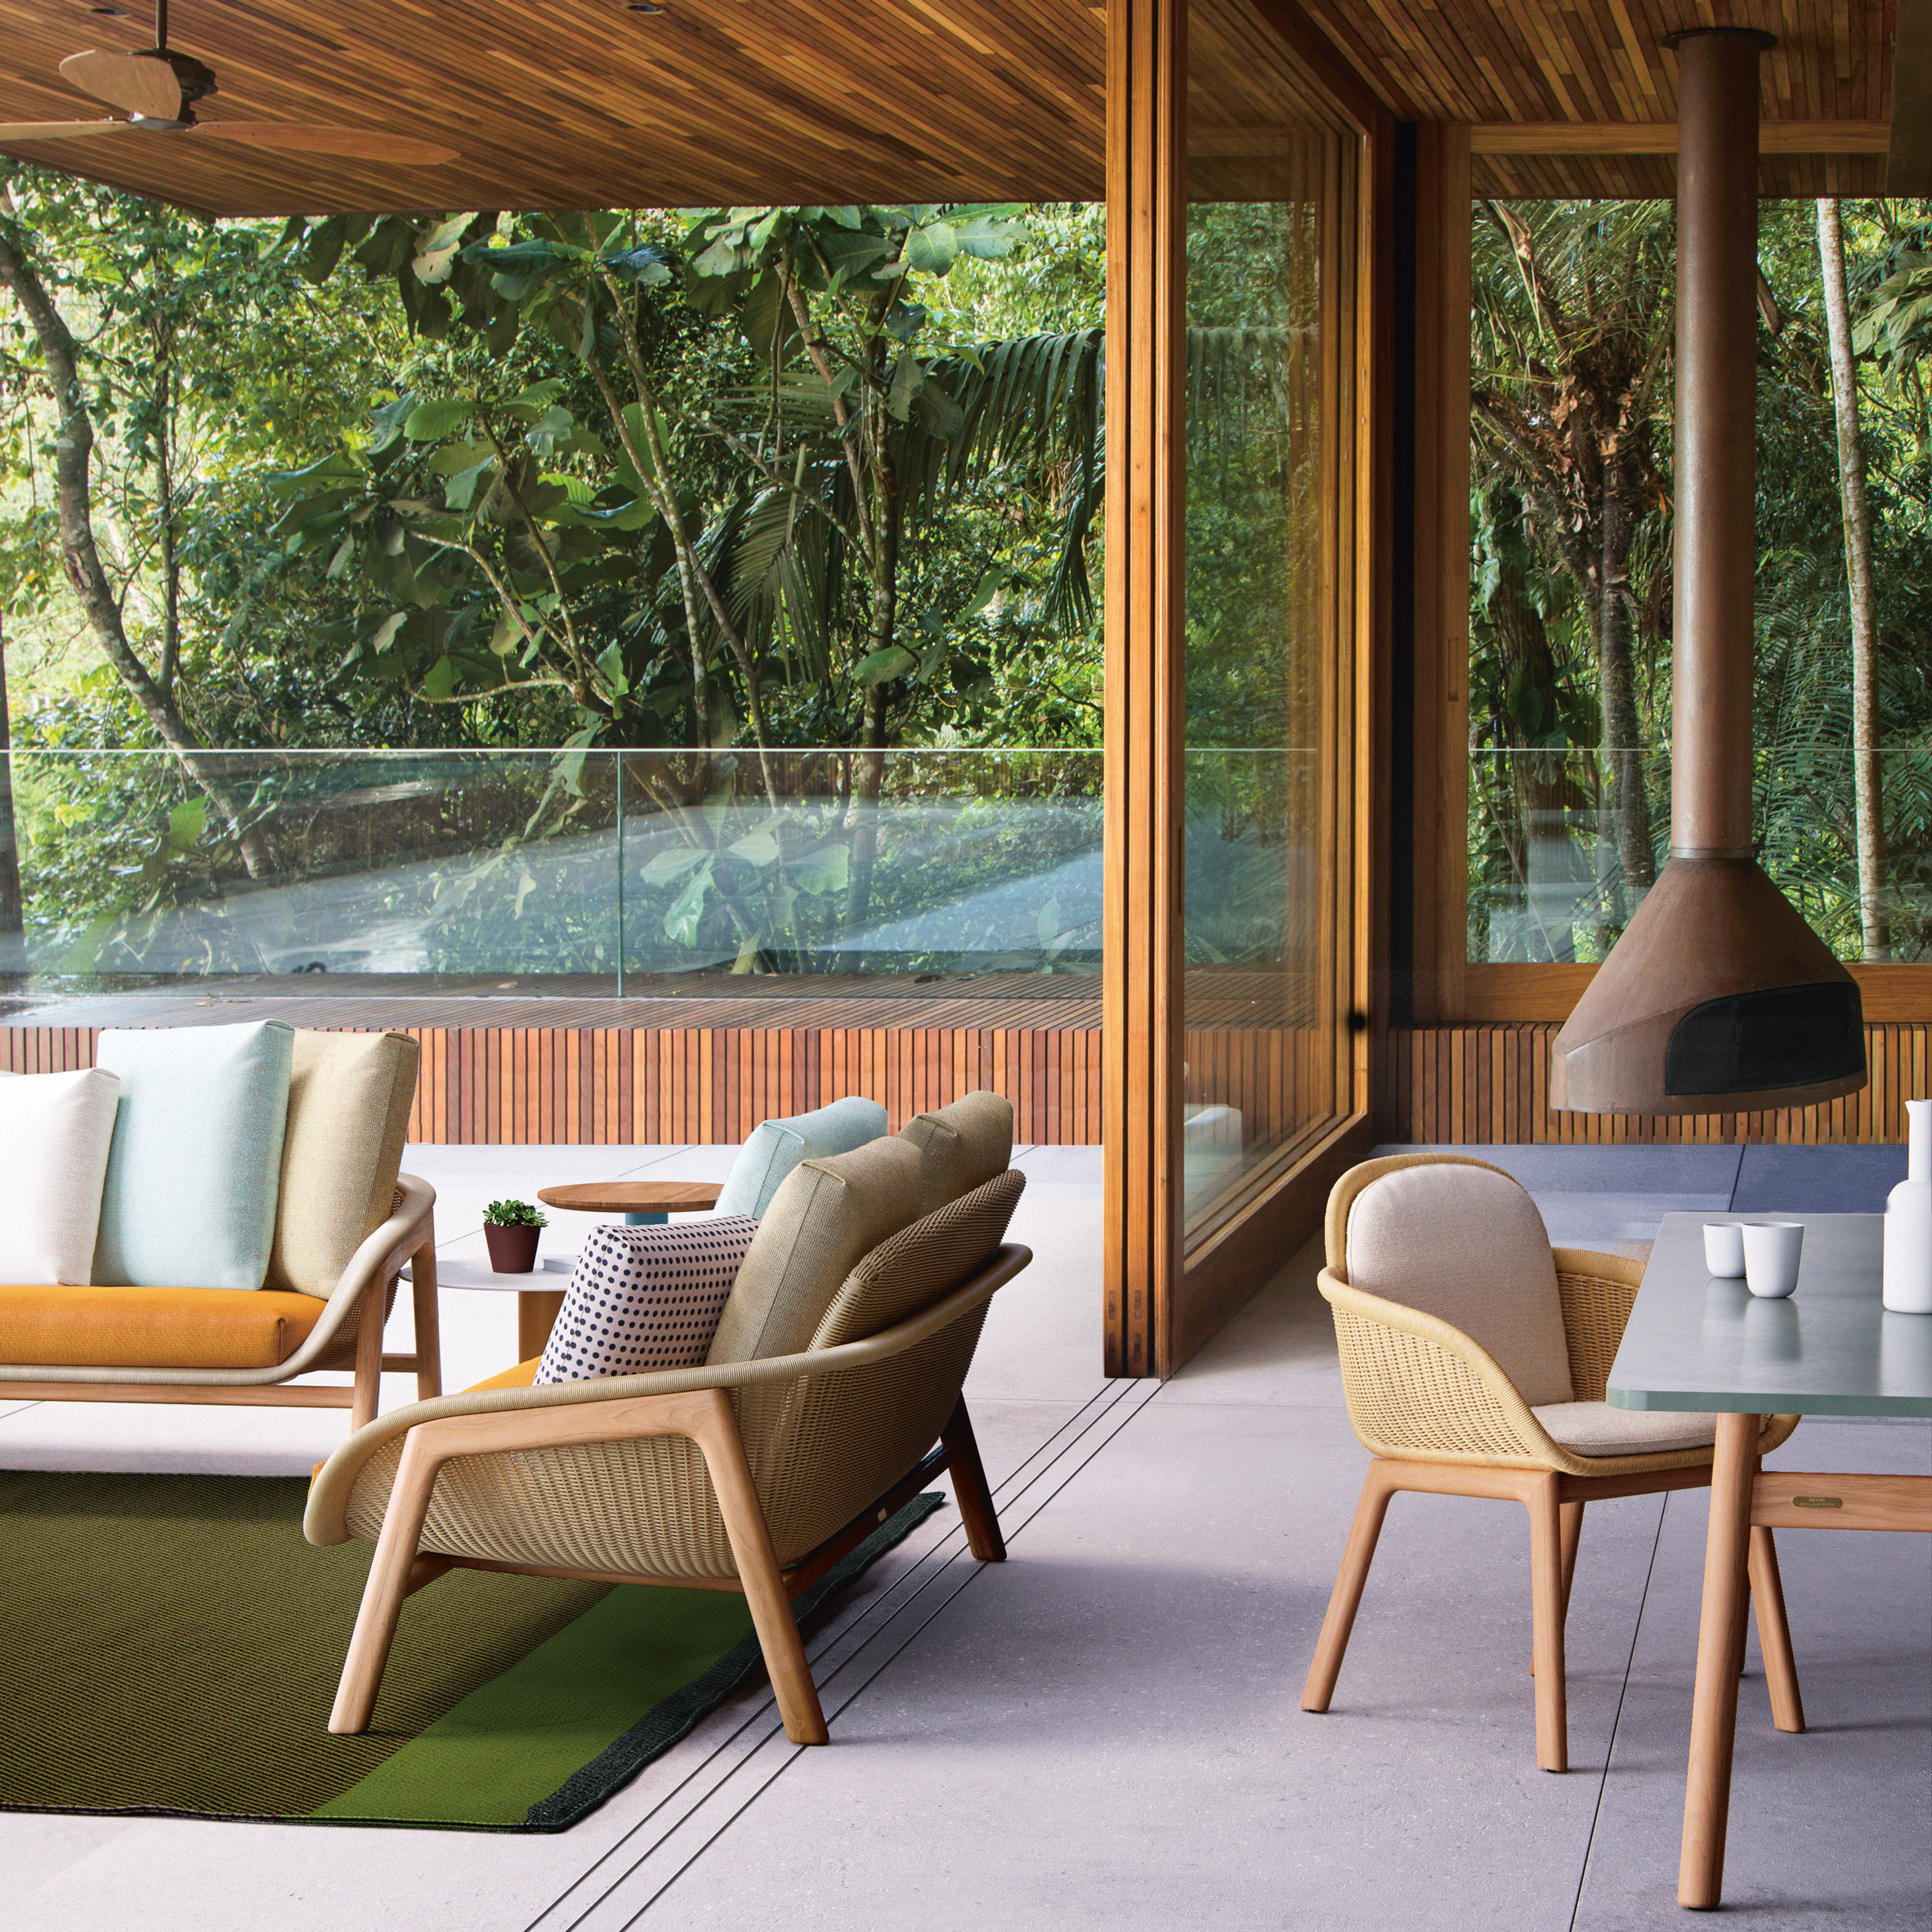 Outdoor furniture: Vimini by Patricia Urquiola for Kettal